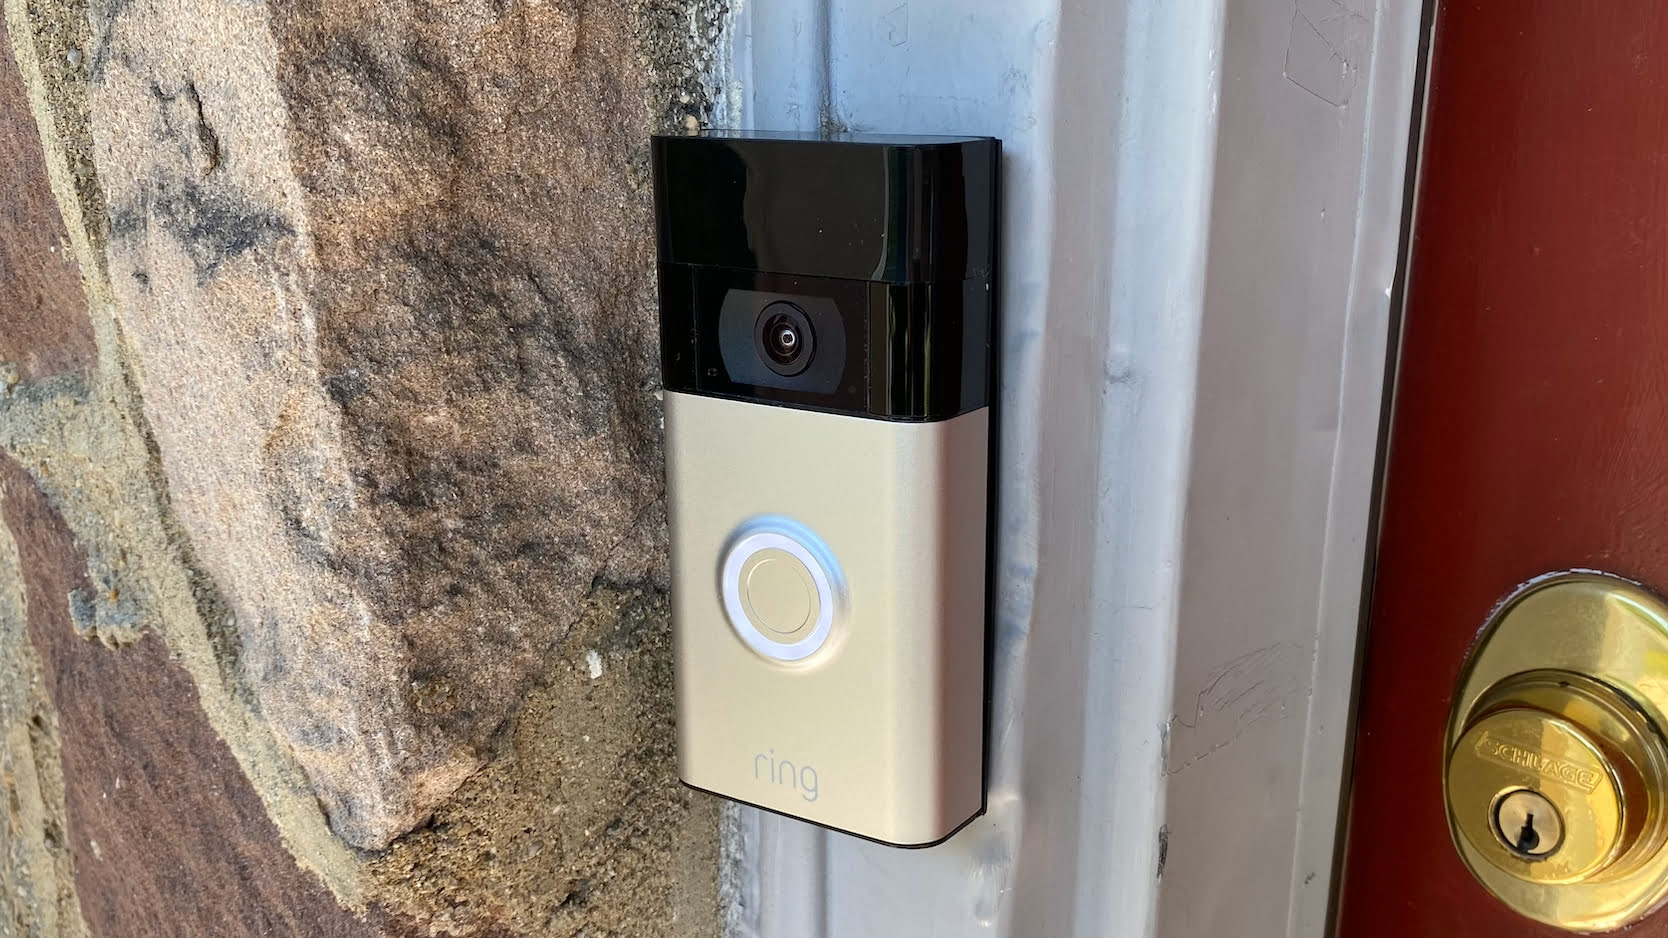 Why Is My Ring Doorbell Not Picking Up Motion